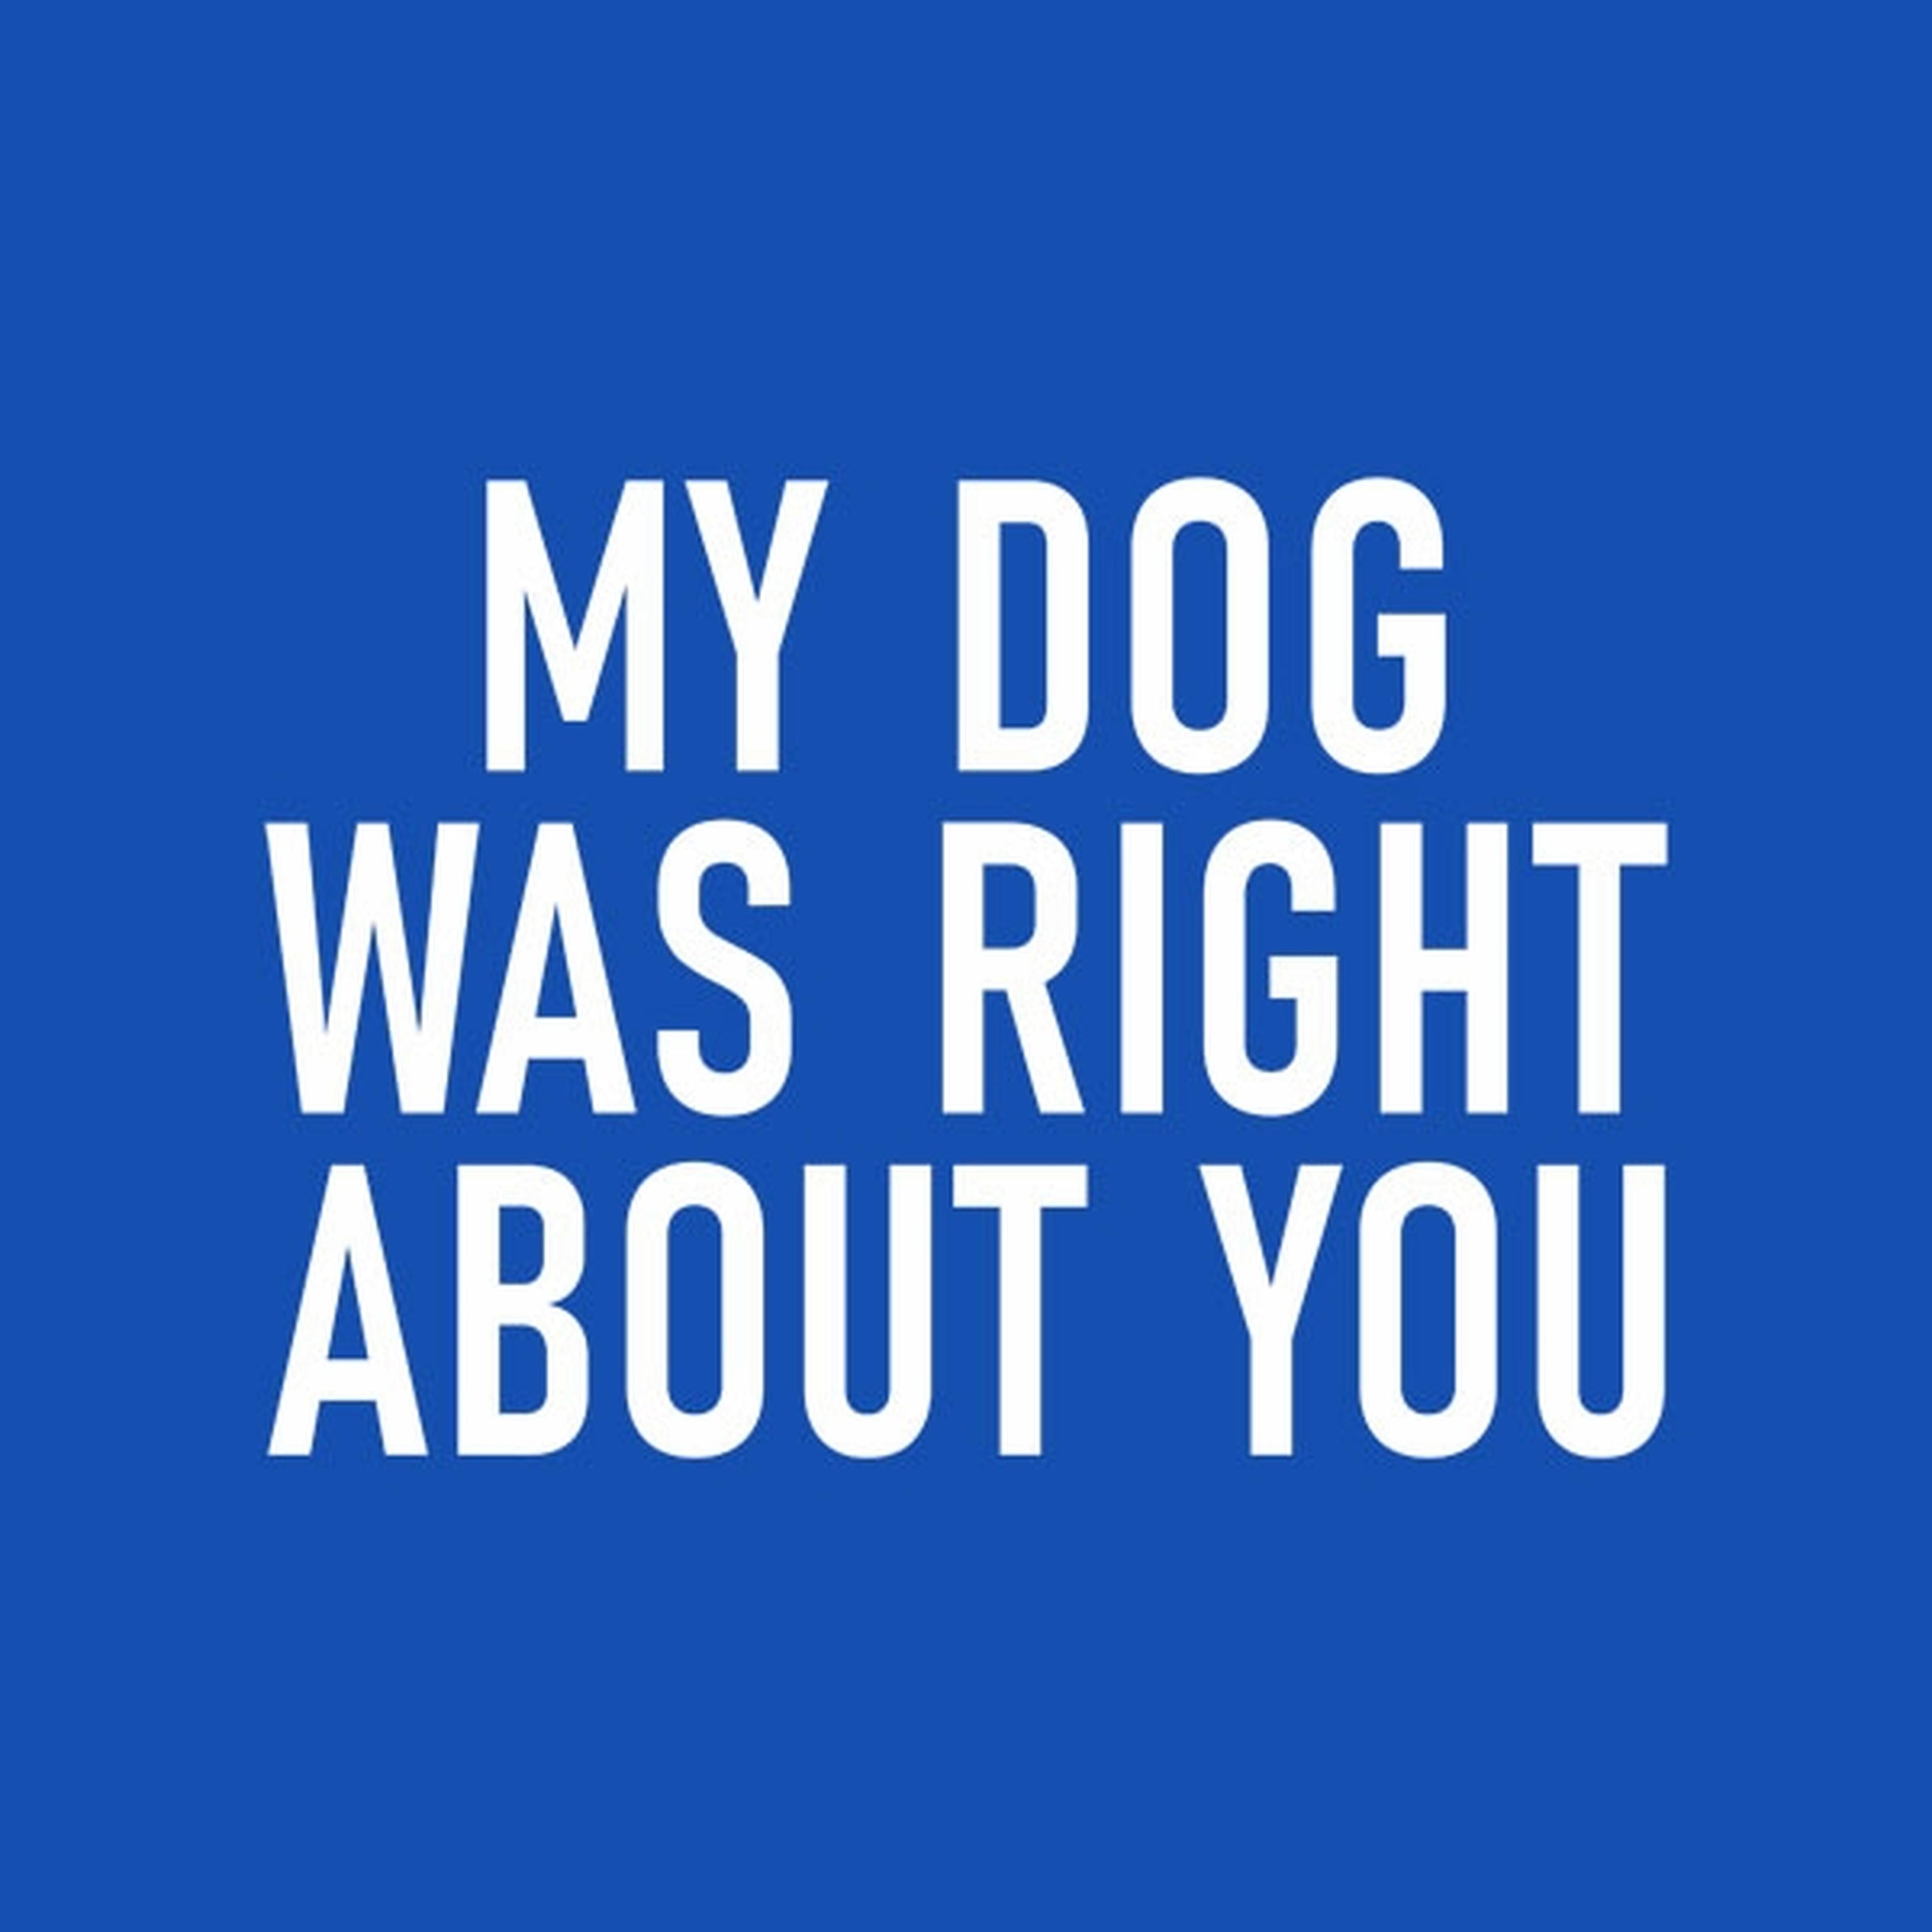 My dog was right about you - T-shirt